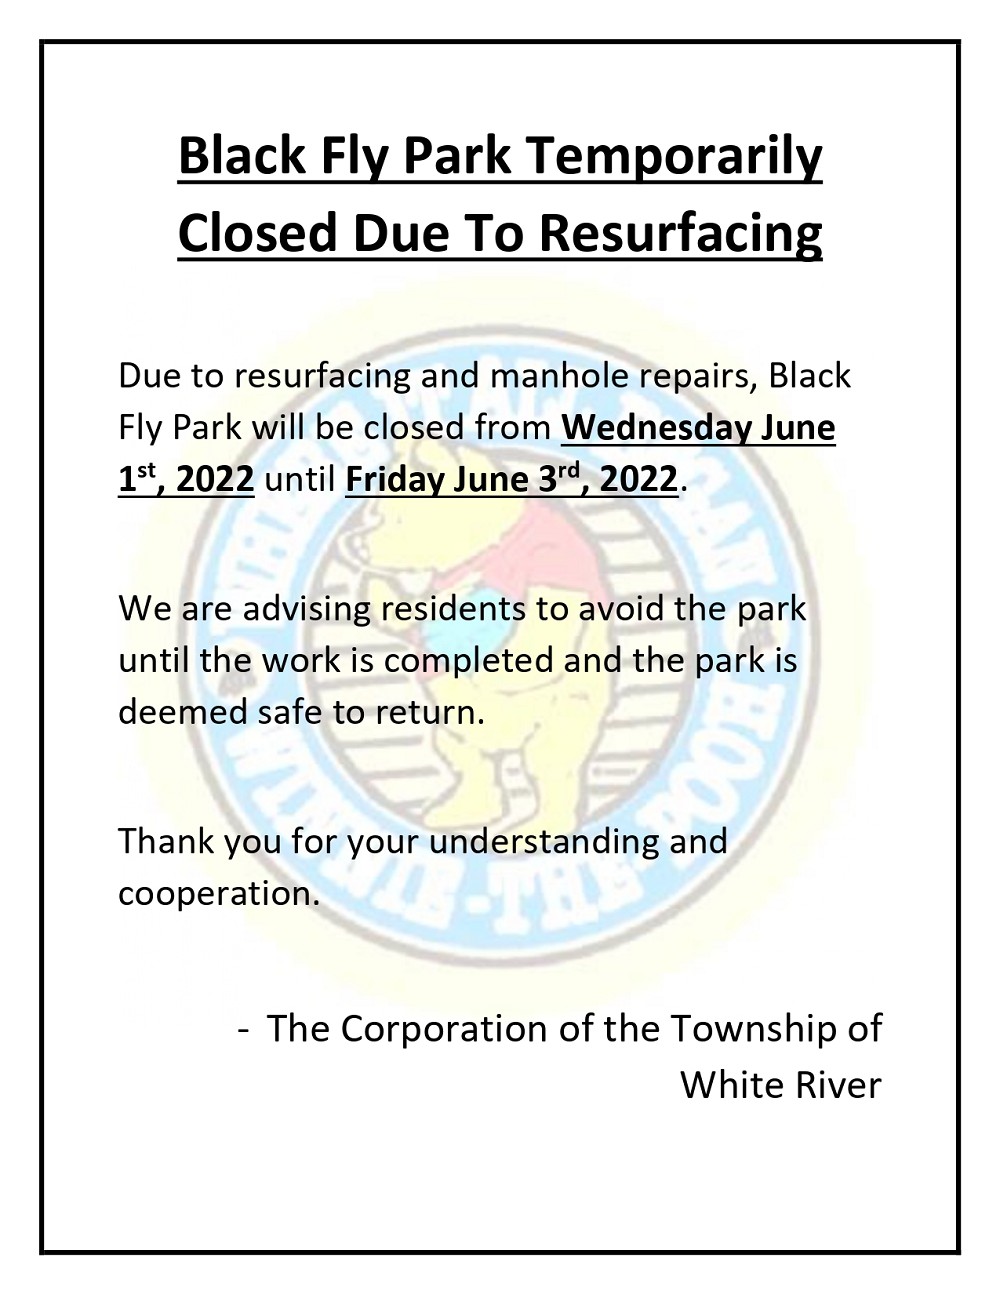 black-fly-park-temporarily-closed-due-to